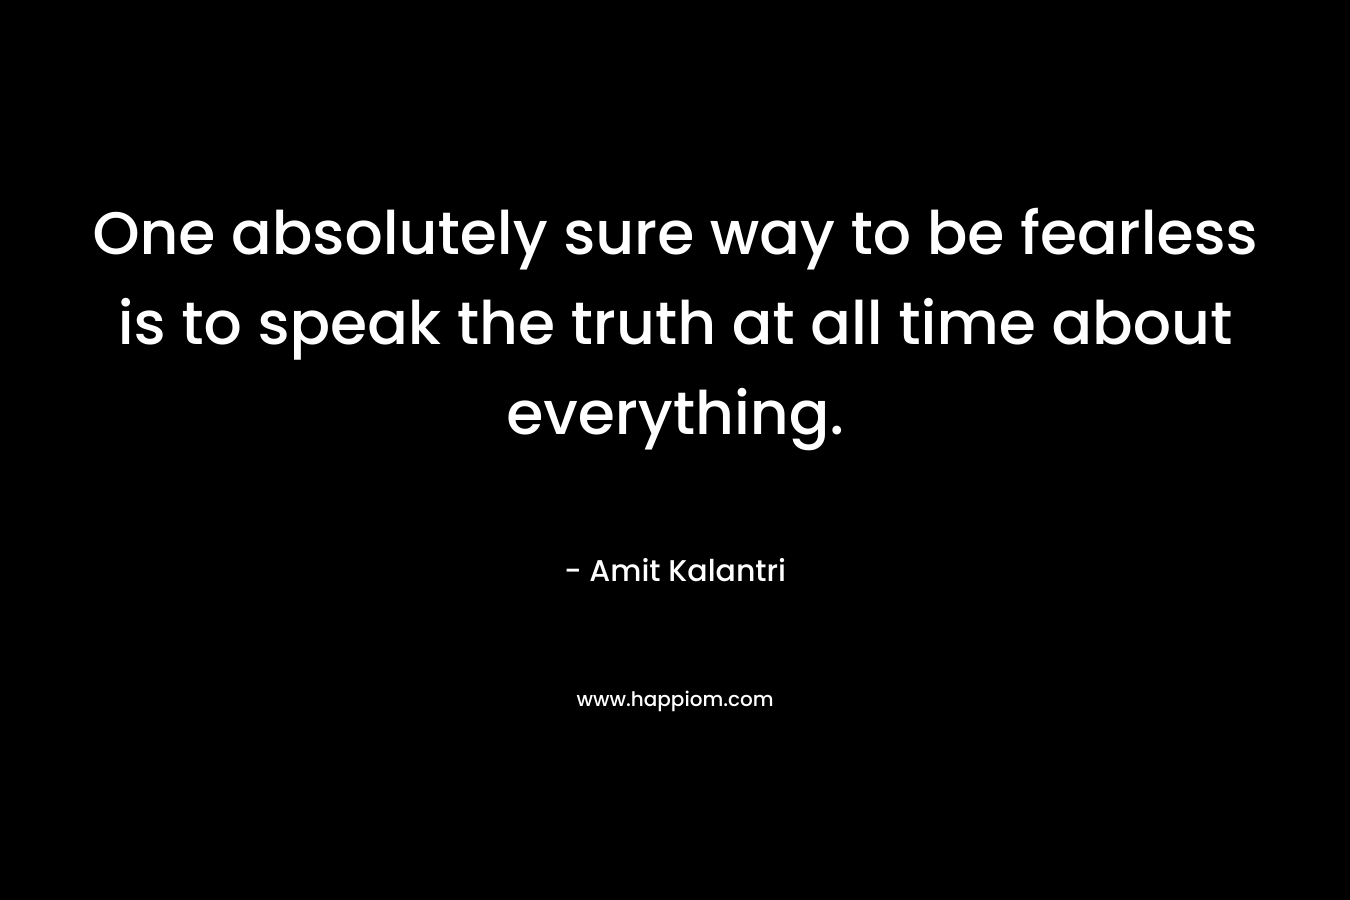 One absolutely sure way to be fearless is to speak the truth at all time about everything.